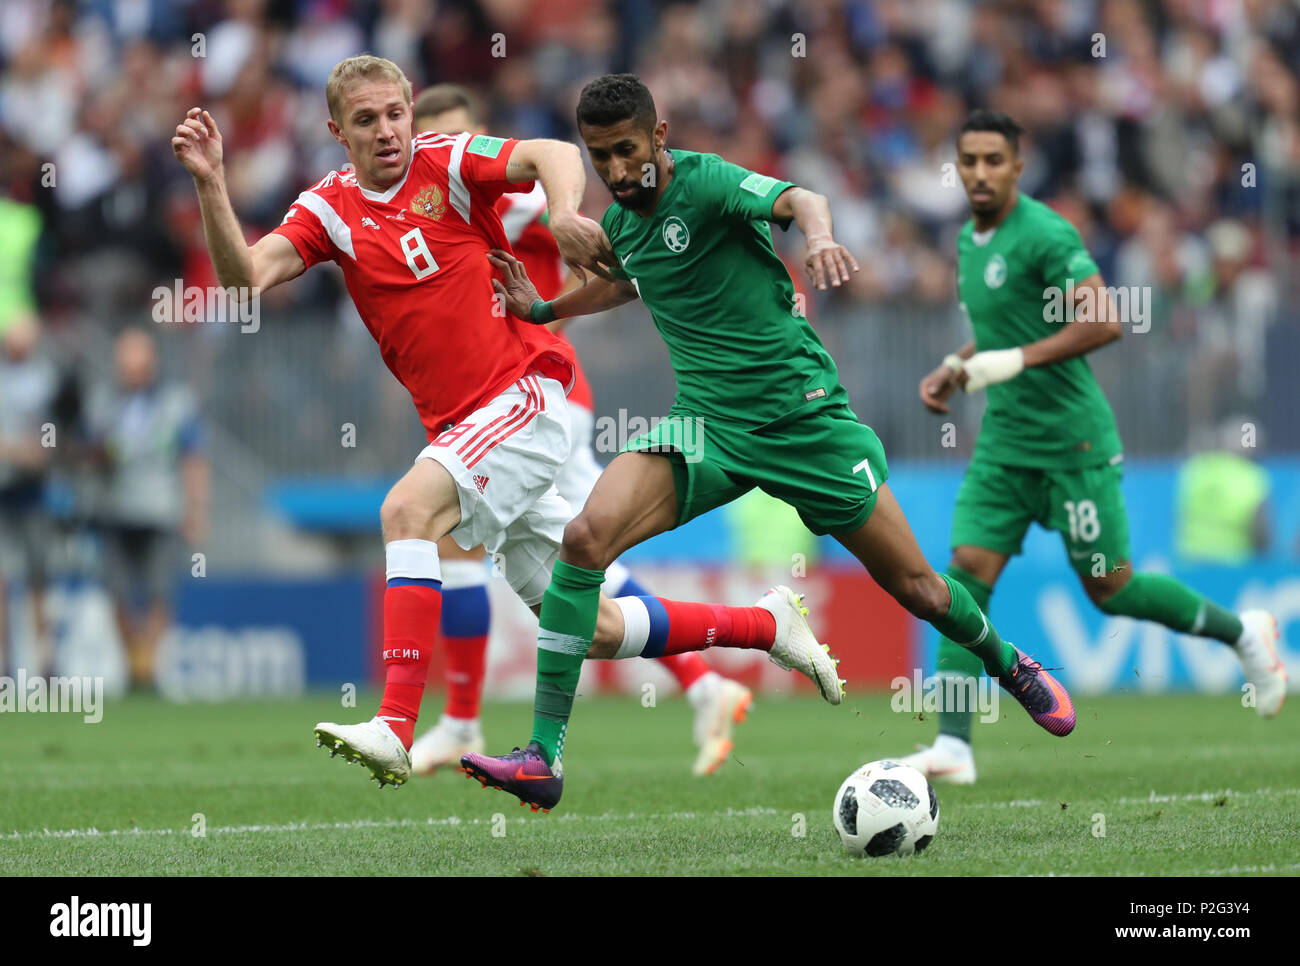 Yuri Gazinskiy & Salman Al-Faraj RUSSIA V SAUDI ARABIA RUSSIA V SAUDI ARABIA, 2018 FIFA WORLD CUP RUSSIA 14 June 2018 GBC8050 2018 FIFA World Cup Russia STRICTLY EDITORIAL USE ONLY. If The Player/Players Depicted In This Image Is/Are Playing For An English Club Or The England National Team. Then This Image May Only Be Used For Editorial Purposes. No Commercial Use. The Following Usages Are Also Restricted EVEN IF IN AN EDITORIAL CONTEXT: Use in conjuction with, or part of, any unauthorized audio, video, data, fixture lists, club/league logos, Betting, Games or any 'live' serv Stock Photo